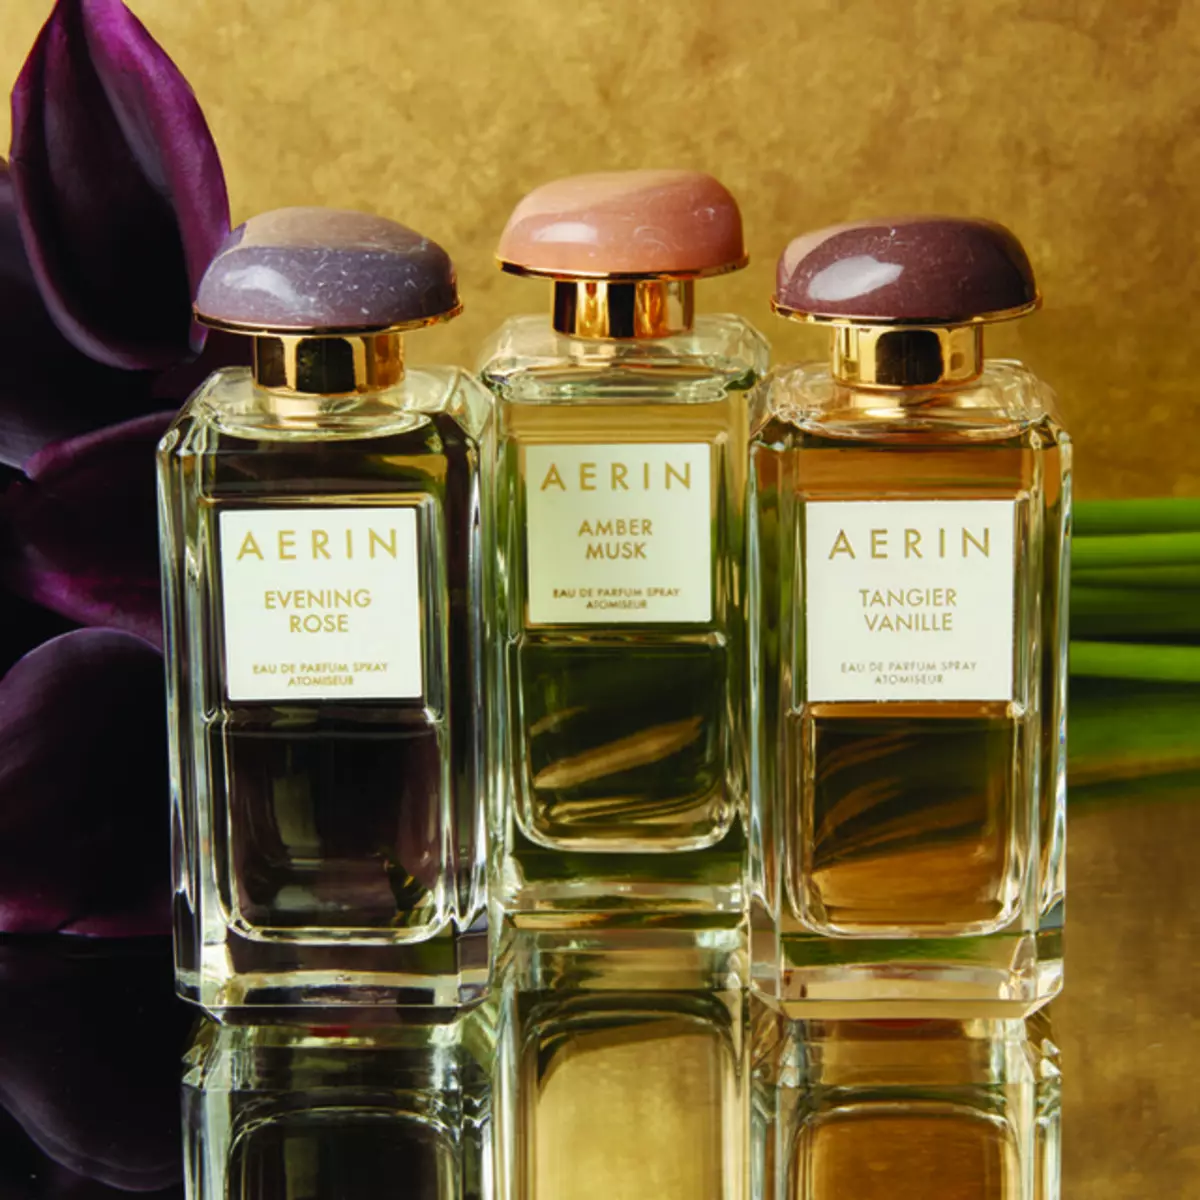 Perfumes Aerin Lauder: Perfume Amber Musk, Tangier Vanille and other perfumes, selection criteria 25206_10